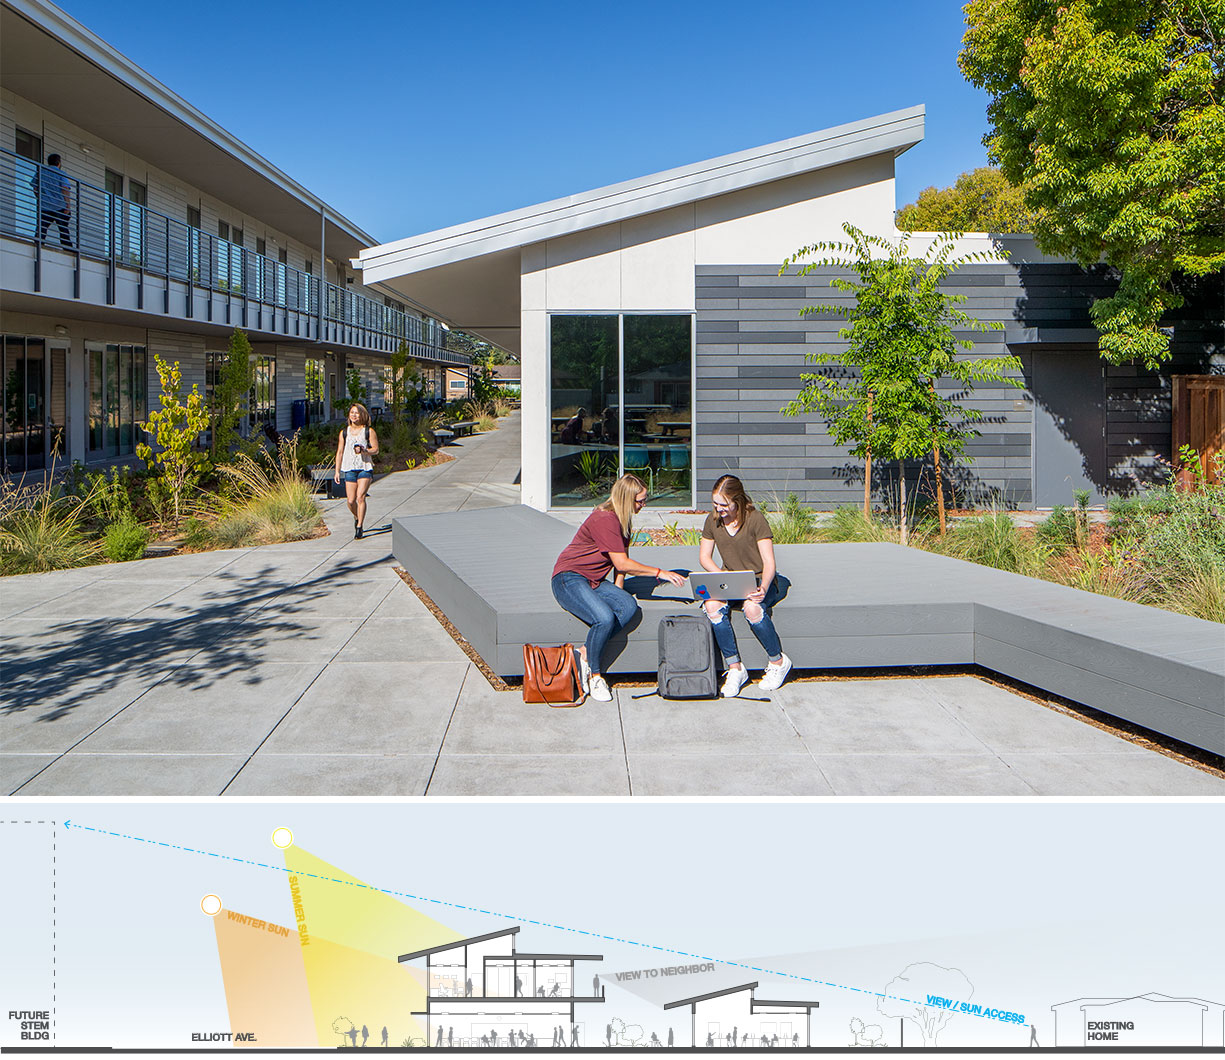 Two images of Jeff Kunde Hall Courtyard including a diagram of the solar exposure into the courtyard